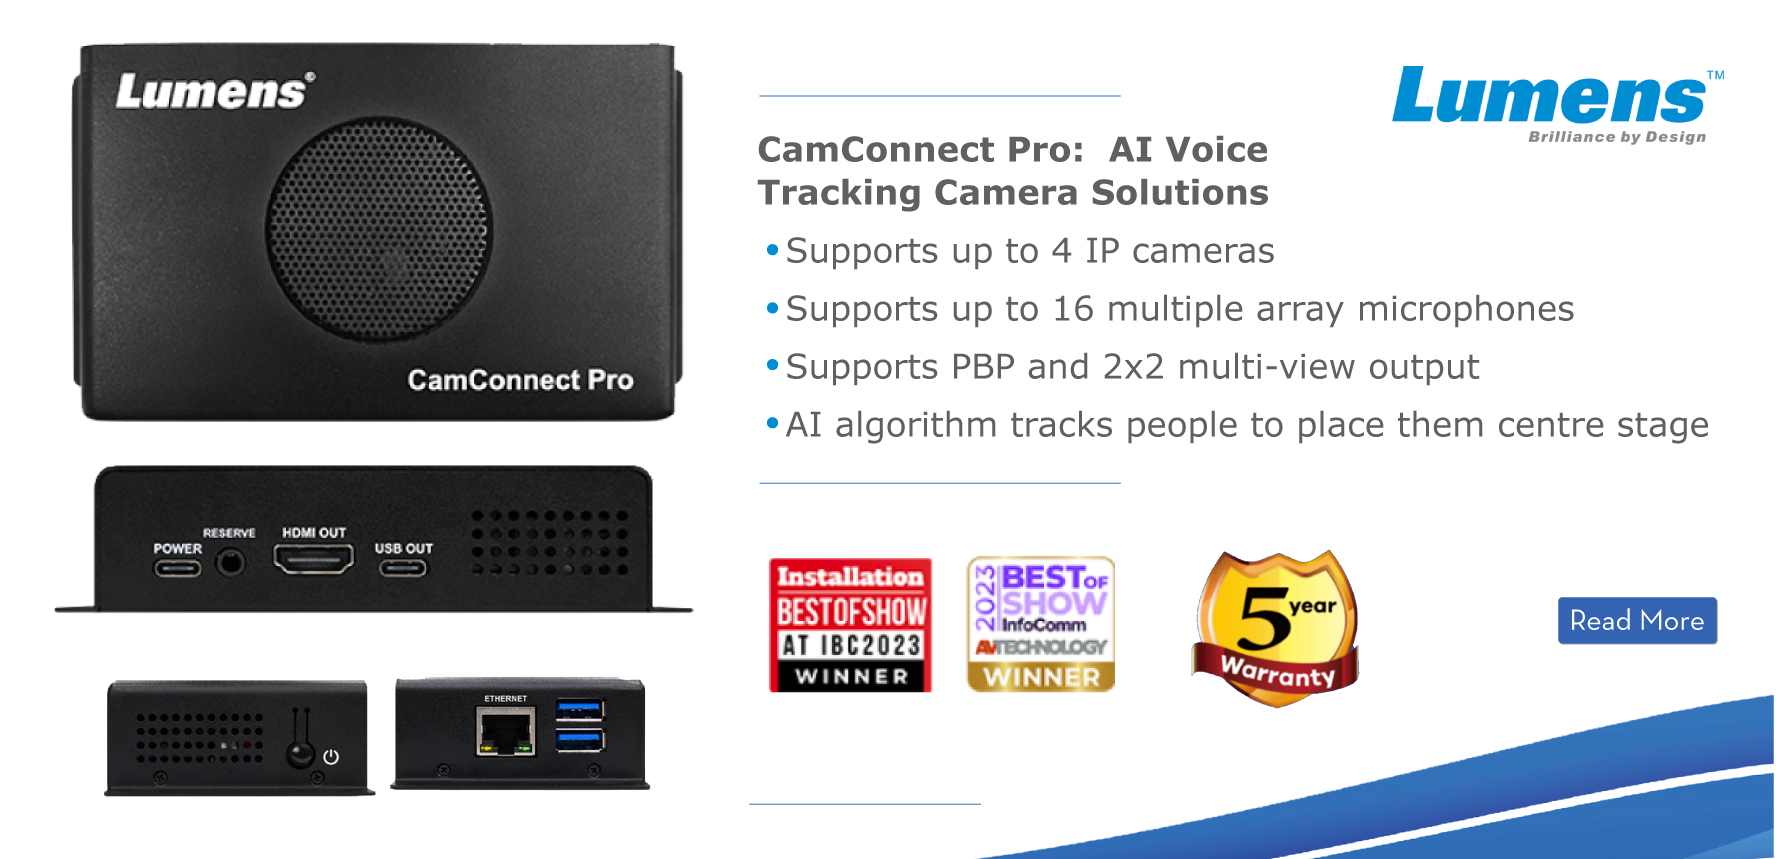 CamConnect Pro: AI Voice -Tracking Camera Solutions by Lumens 1.jpg